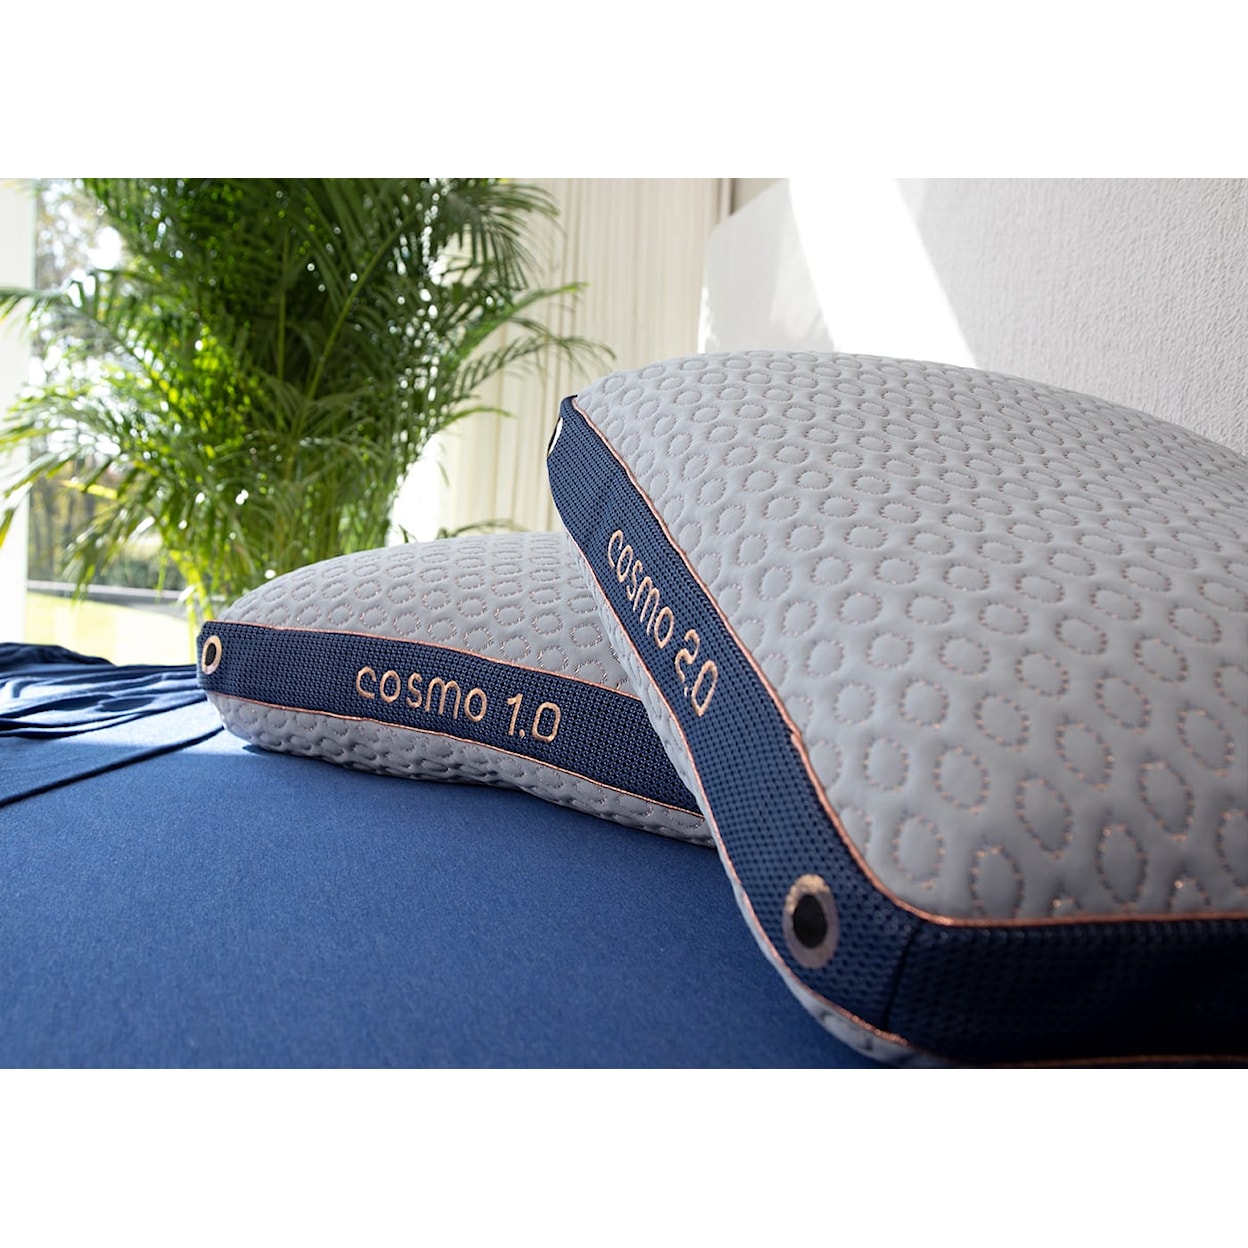 Bedgear Cosmo Cosmo Performance Pillow-1.0